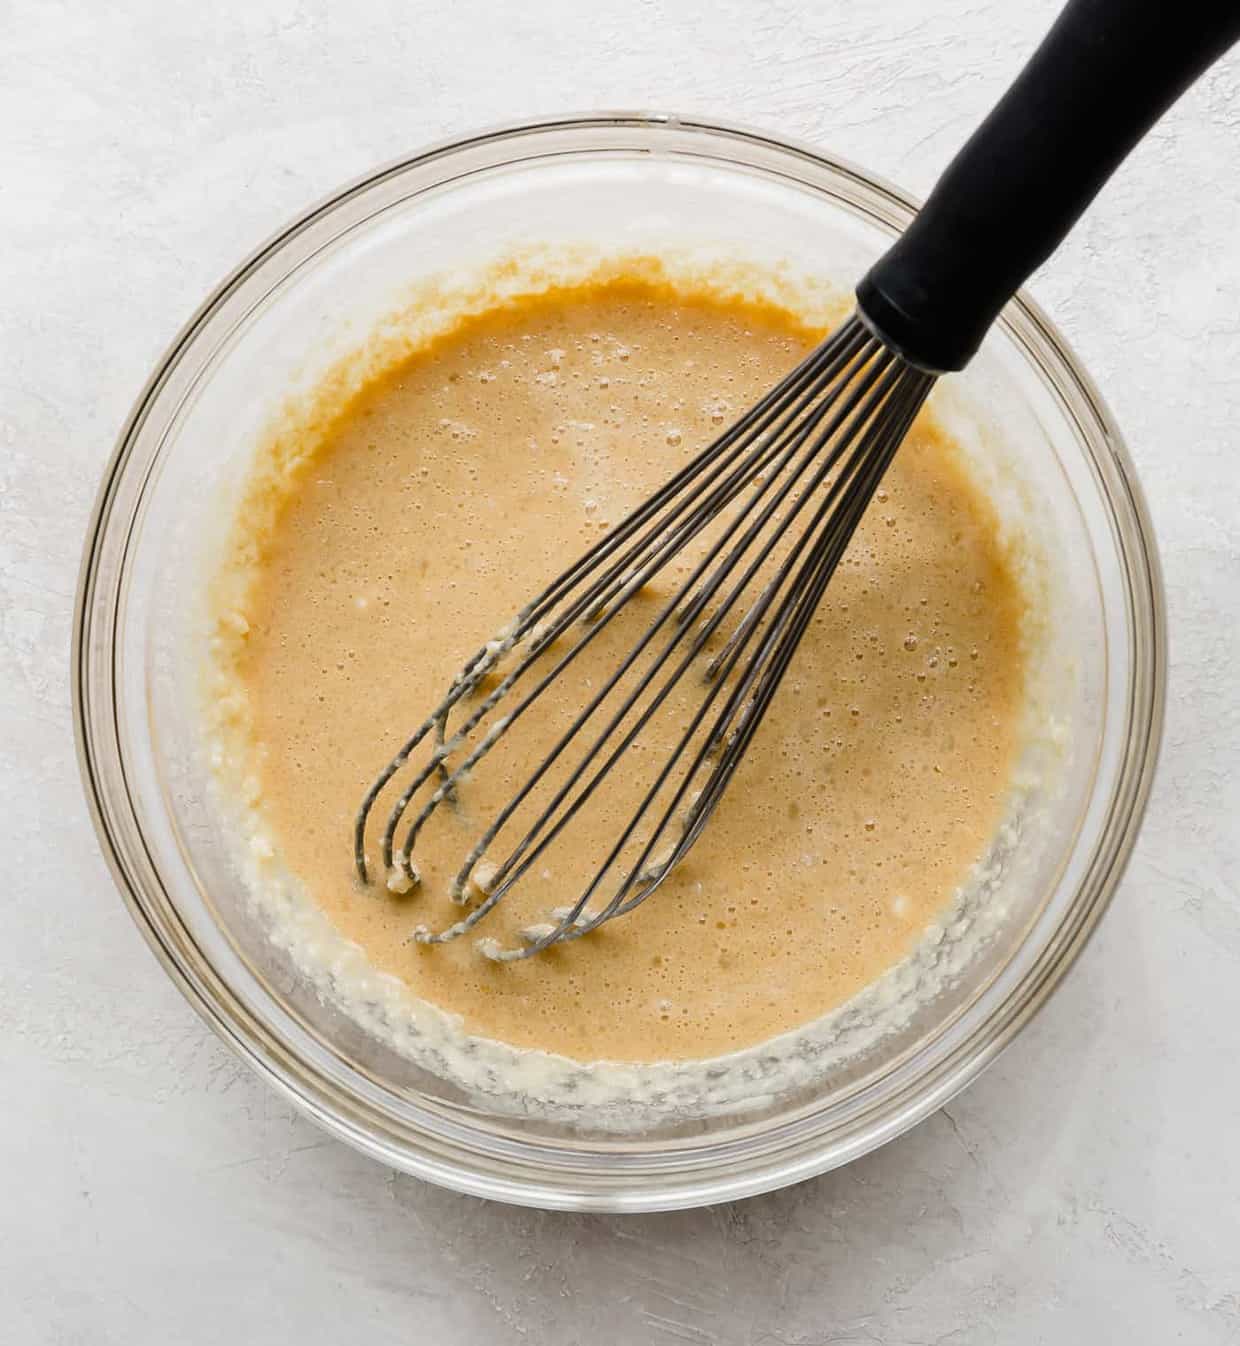 A whisk in a bowl of wet ingredients used to make waffles.